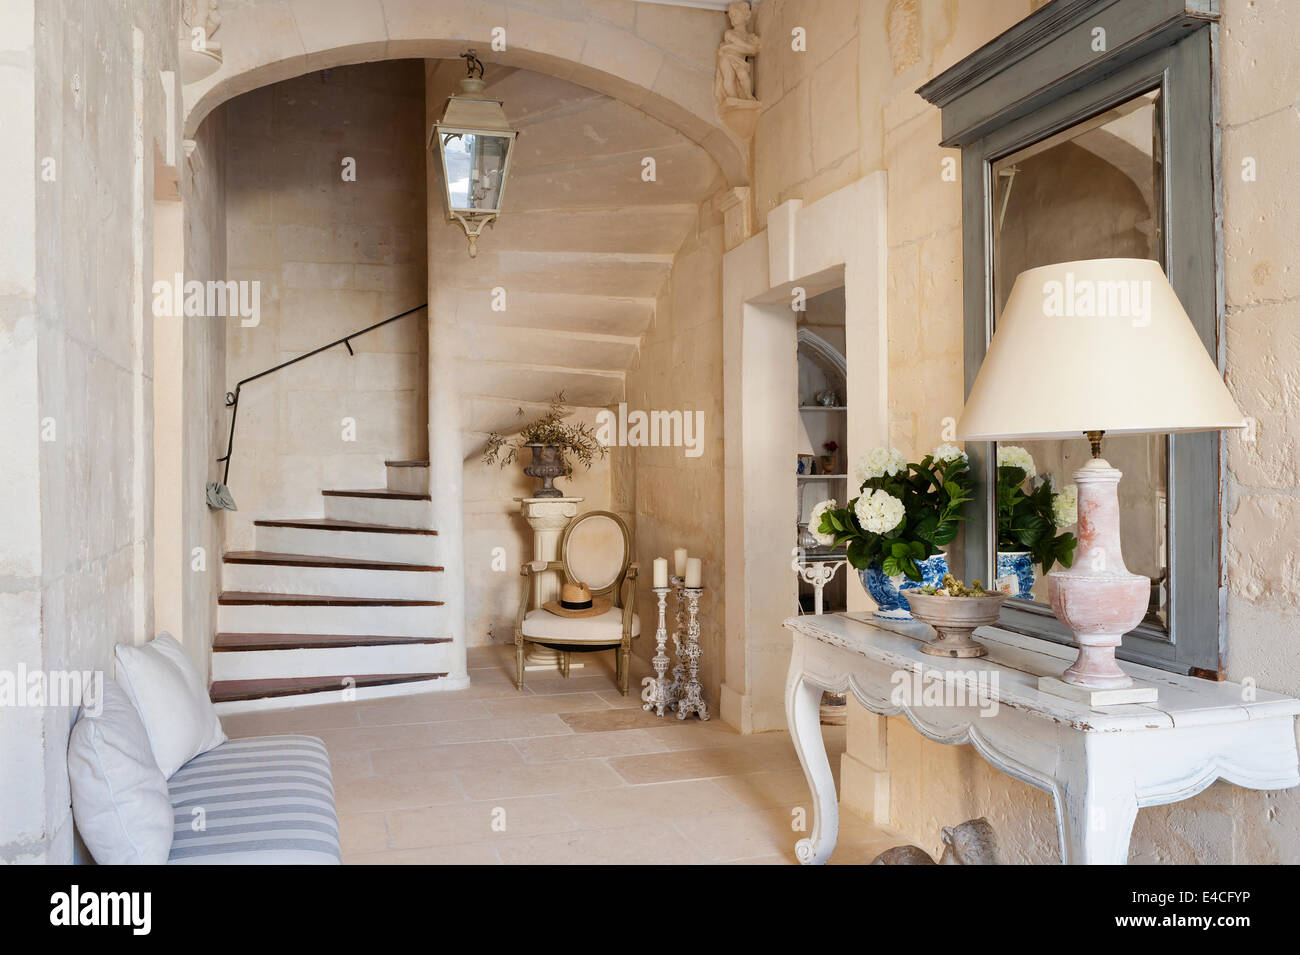 Entrance hall in 18th century provencal house with stone staircase and antique two legged wooden console table Stock Photo